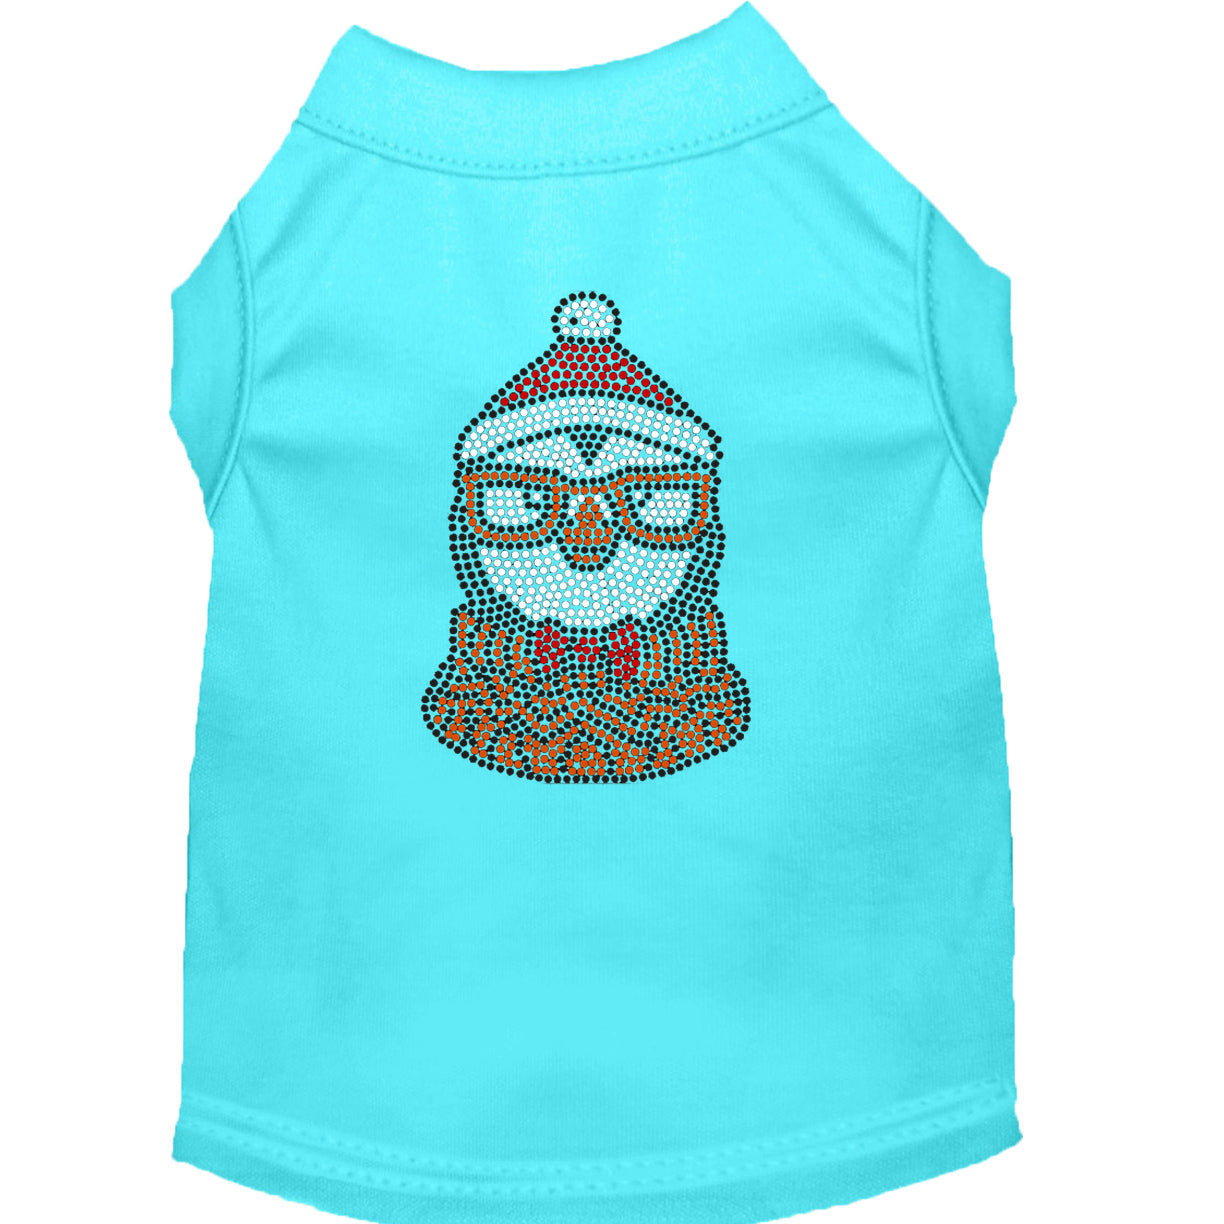 Hipster Penguin Rhinestone Shirts for Cats and Dogs